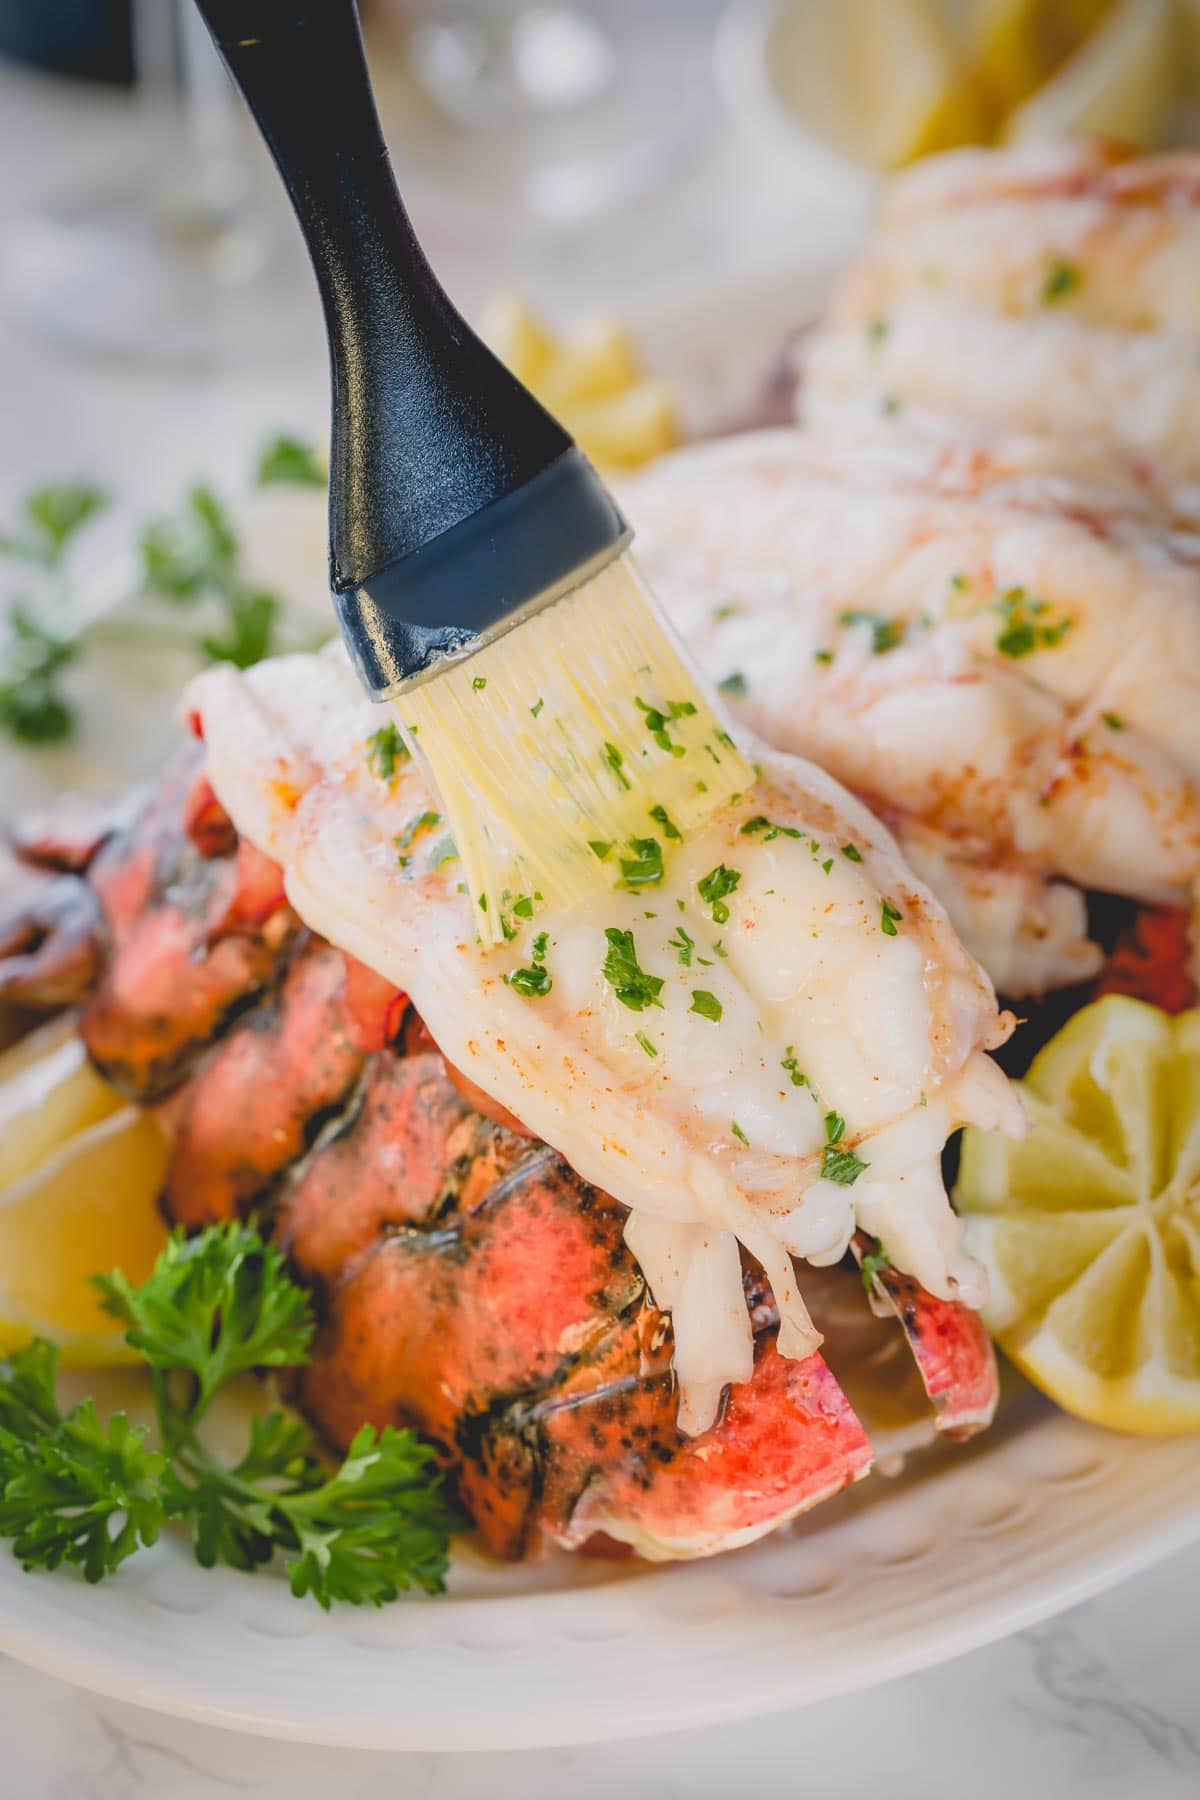 Brushing baked lobster meat with melted butter.